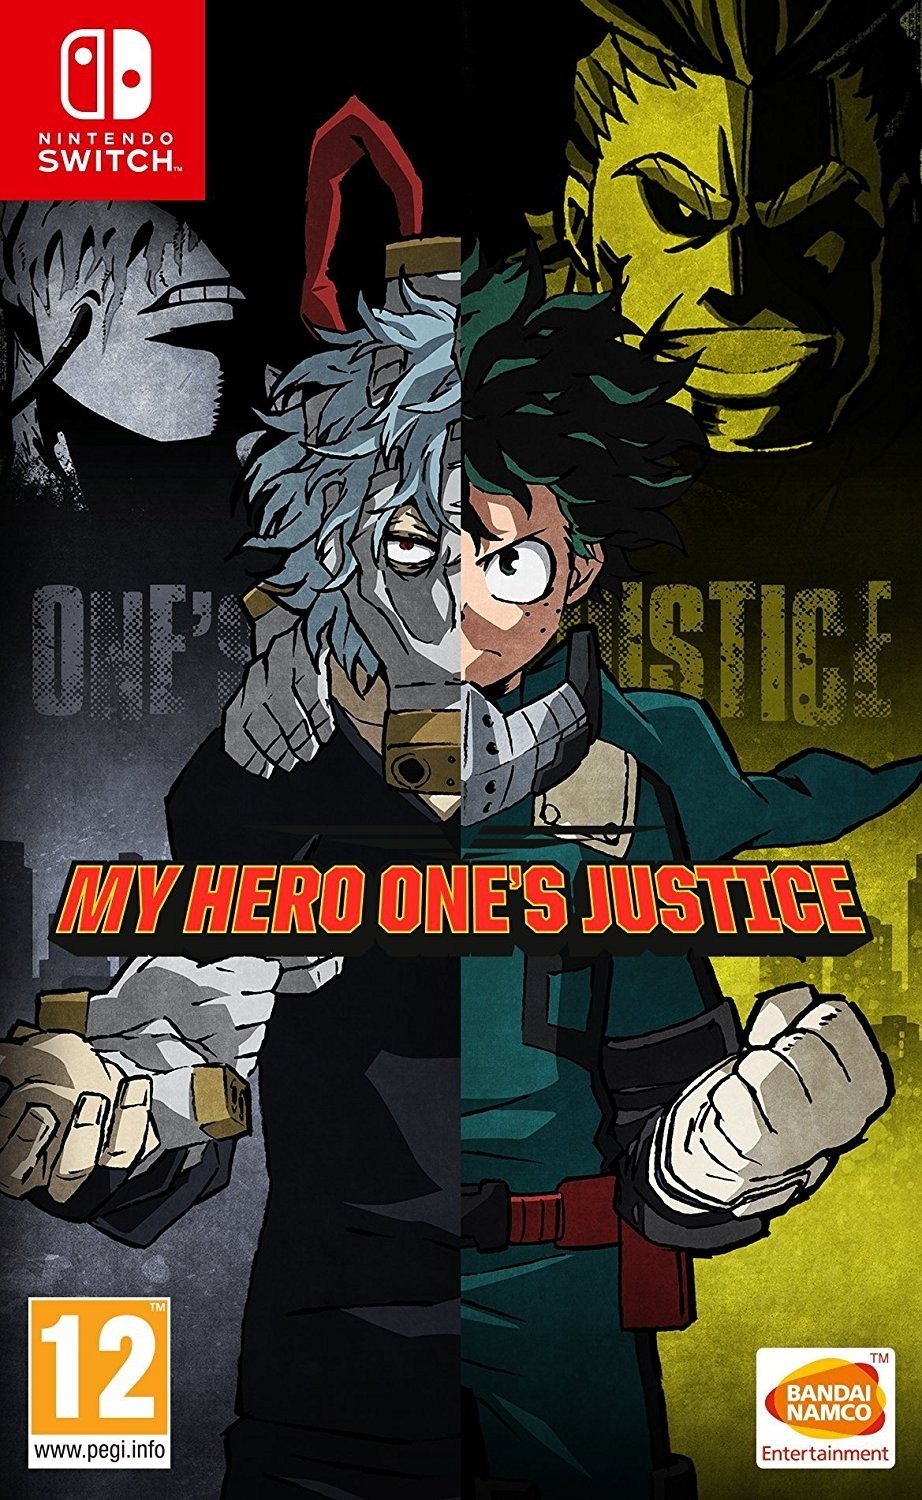 My Hero One's Justice (Switch), Byking